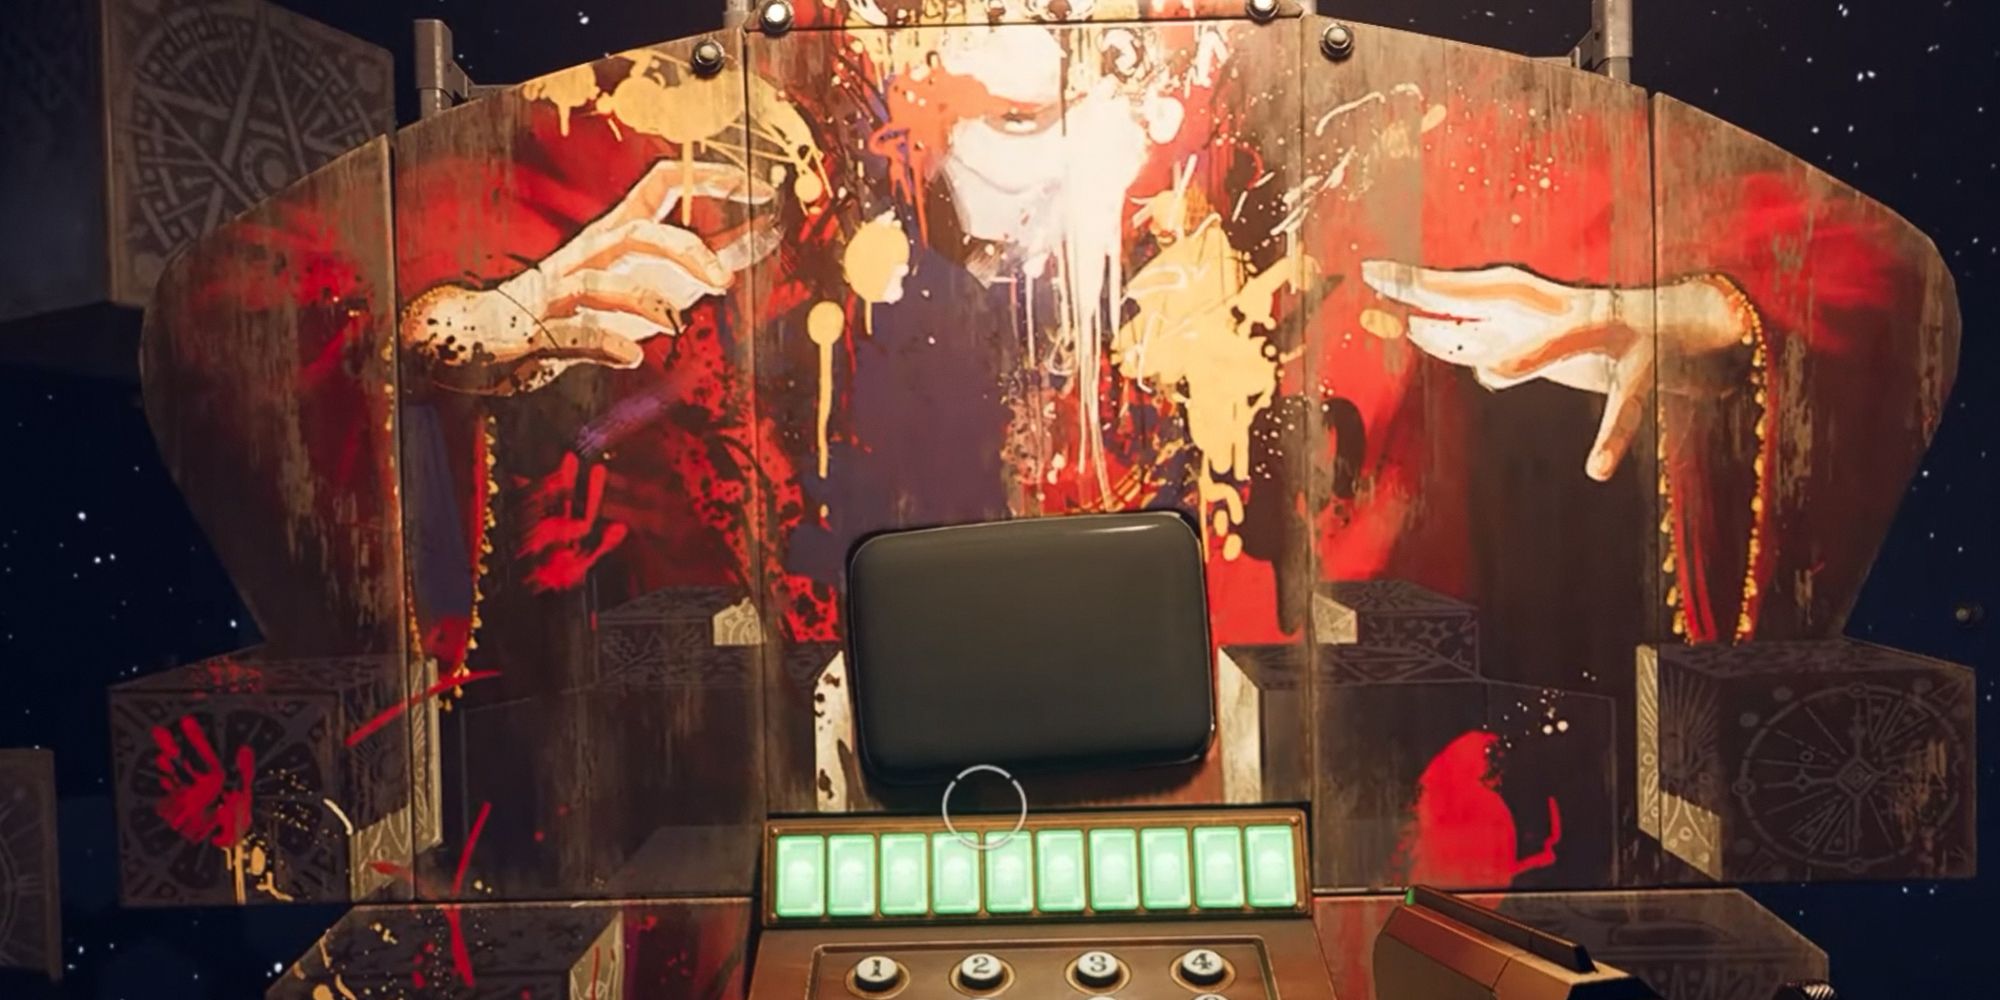 A machine with a painting of two hands over it. The machine asks the player questions about Blackreef.